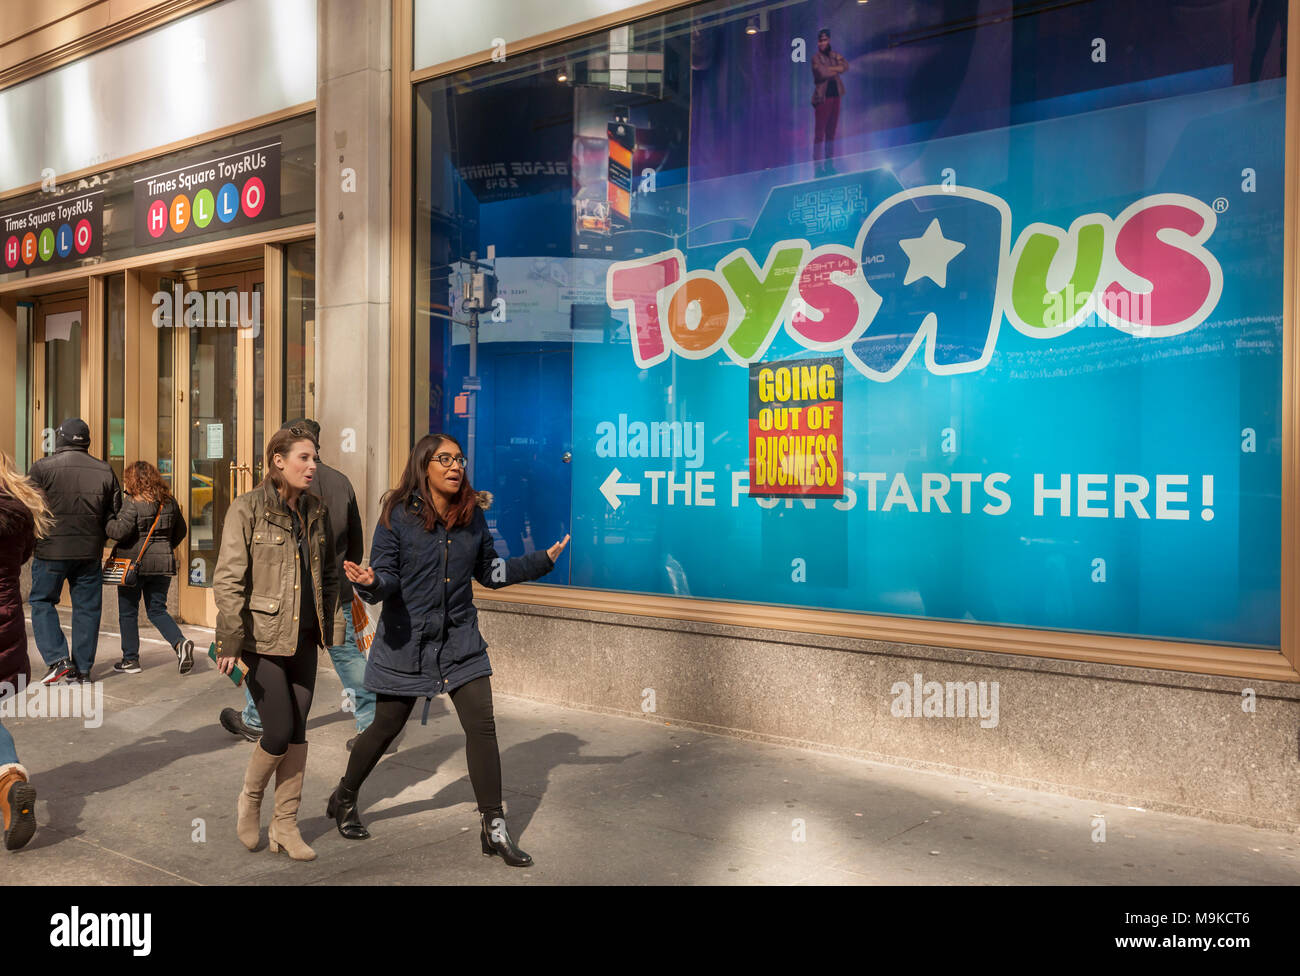 Signs posted on the window of the Toys R Us store in Times Square in New York on Friday,  March 23, 2018 announce that the store is closing and liquidation has begun. Toys R Us is liquidating and closing all 735 of its U.S. stores. The CEO of MGA Entertainment, Issac Larian, the maker of the Bratz dolls, announced a pledge of $200 million, and the creation of a GoFundMe campaign, to save approximately 400 of the 735 closing stores. (Â© Richard B. Levine) Stock Photo